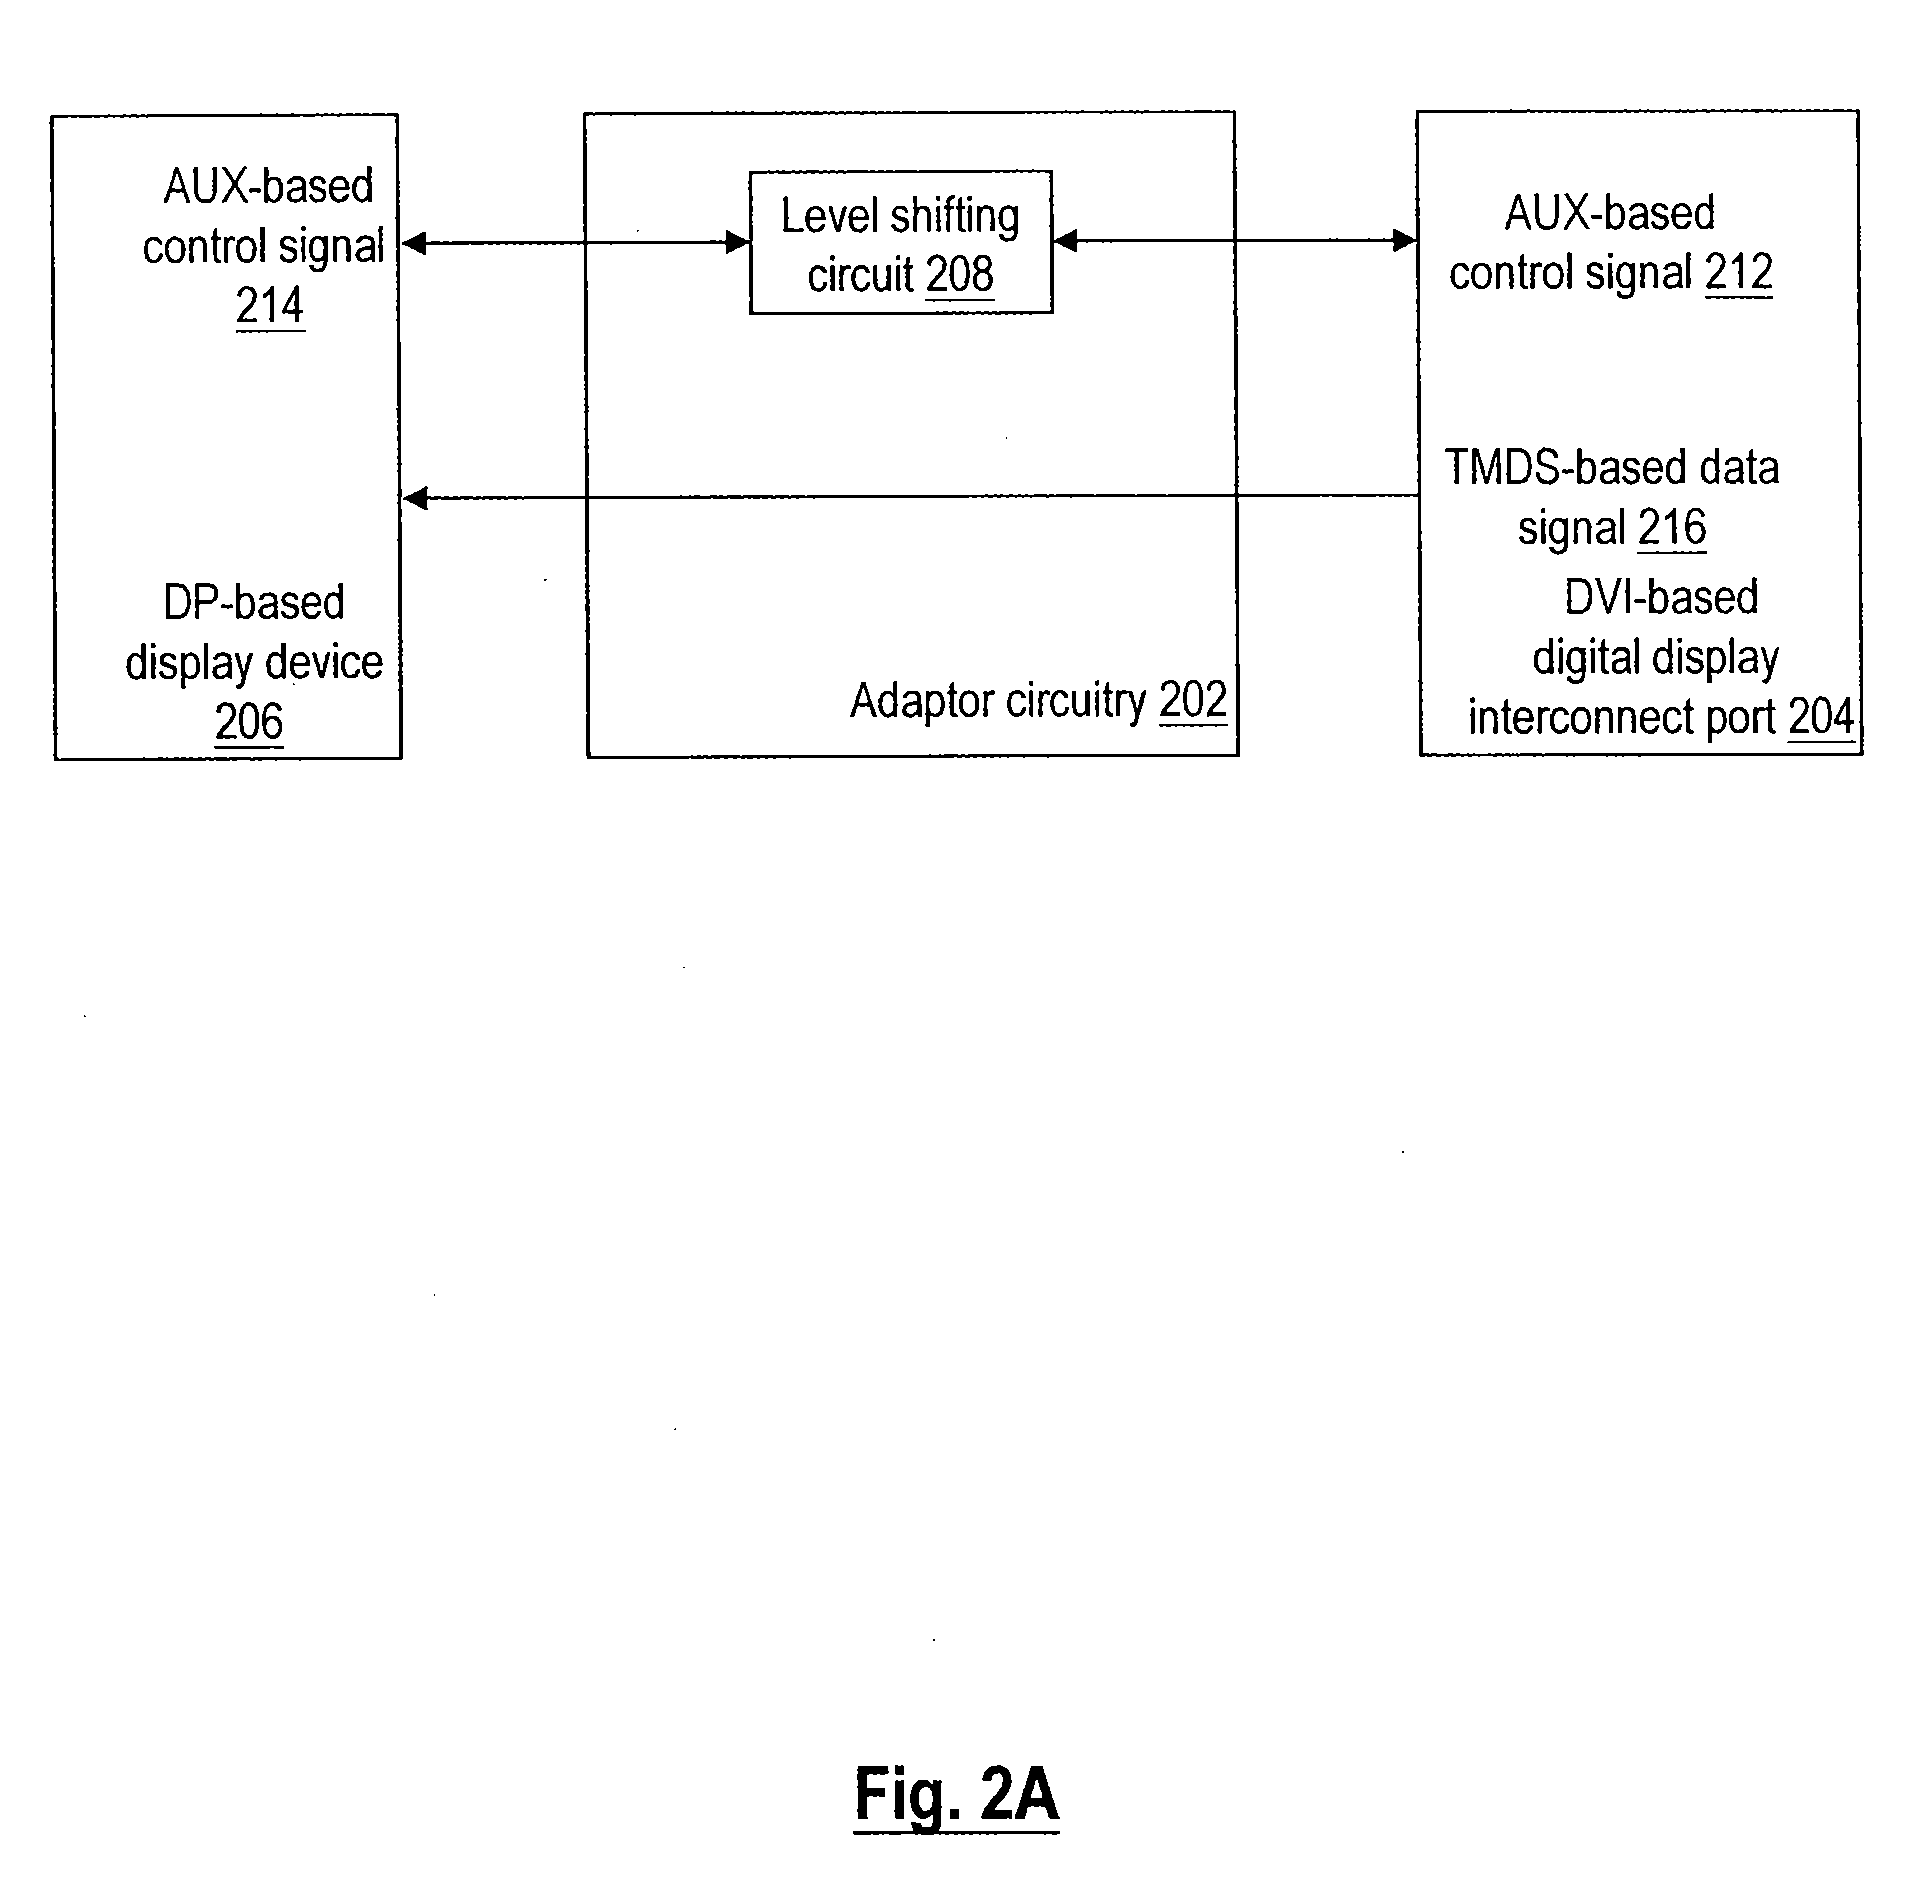 Graphics system for supporting multiple digital display interface standards